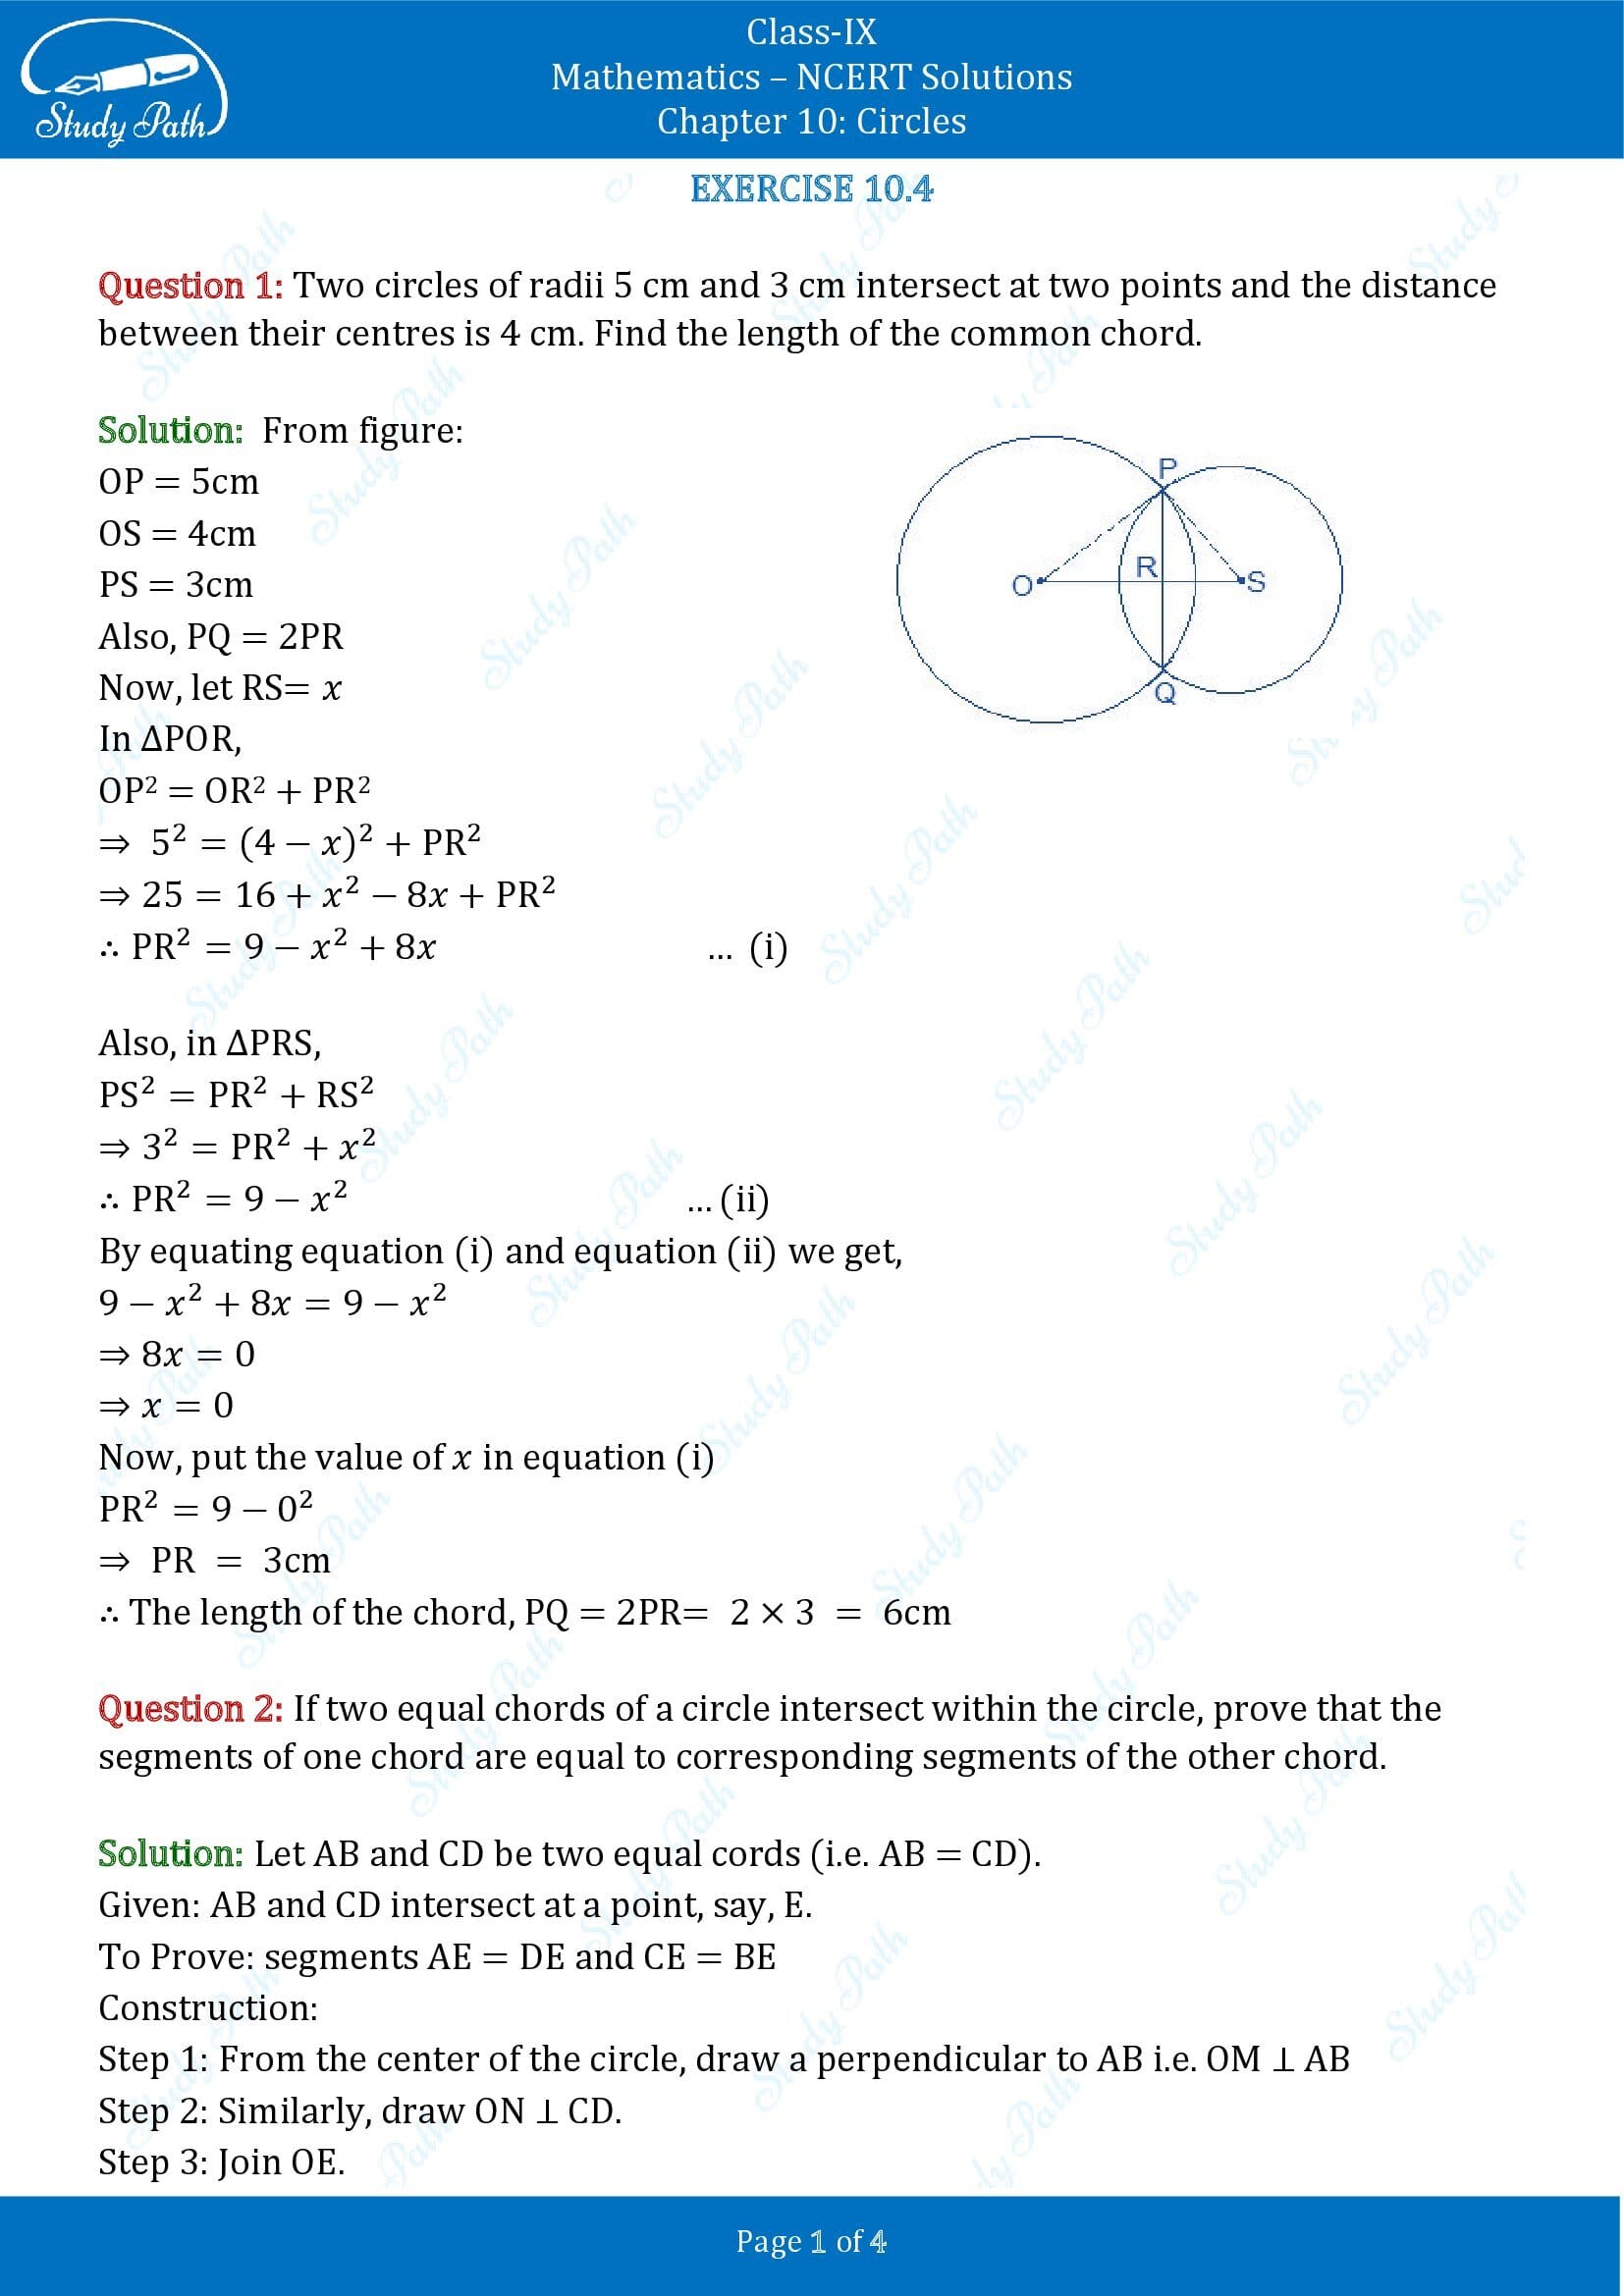 NCERT Solutions for Class 9 Maths Chapter 10 Circles Exercise 10.4 00001